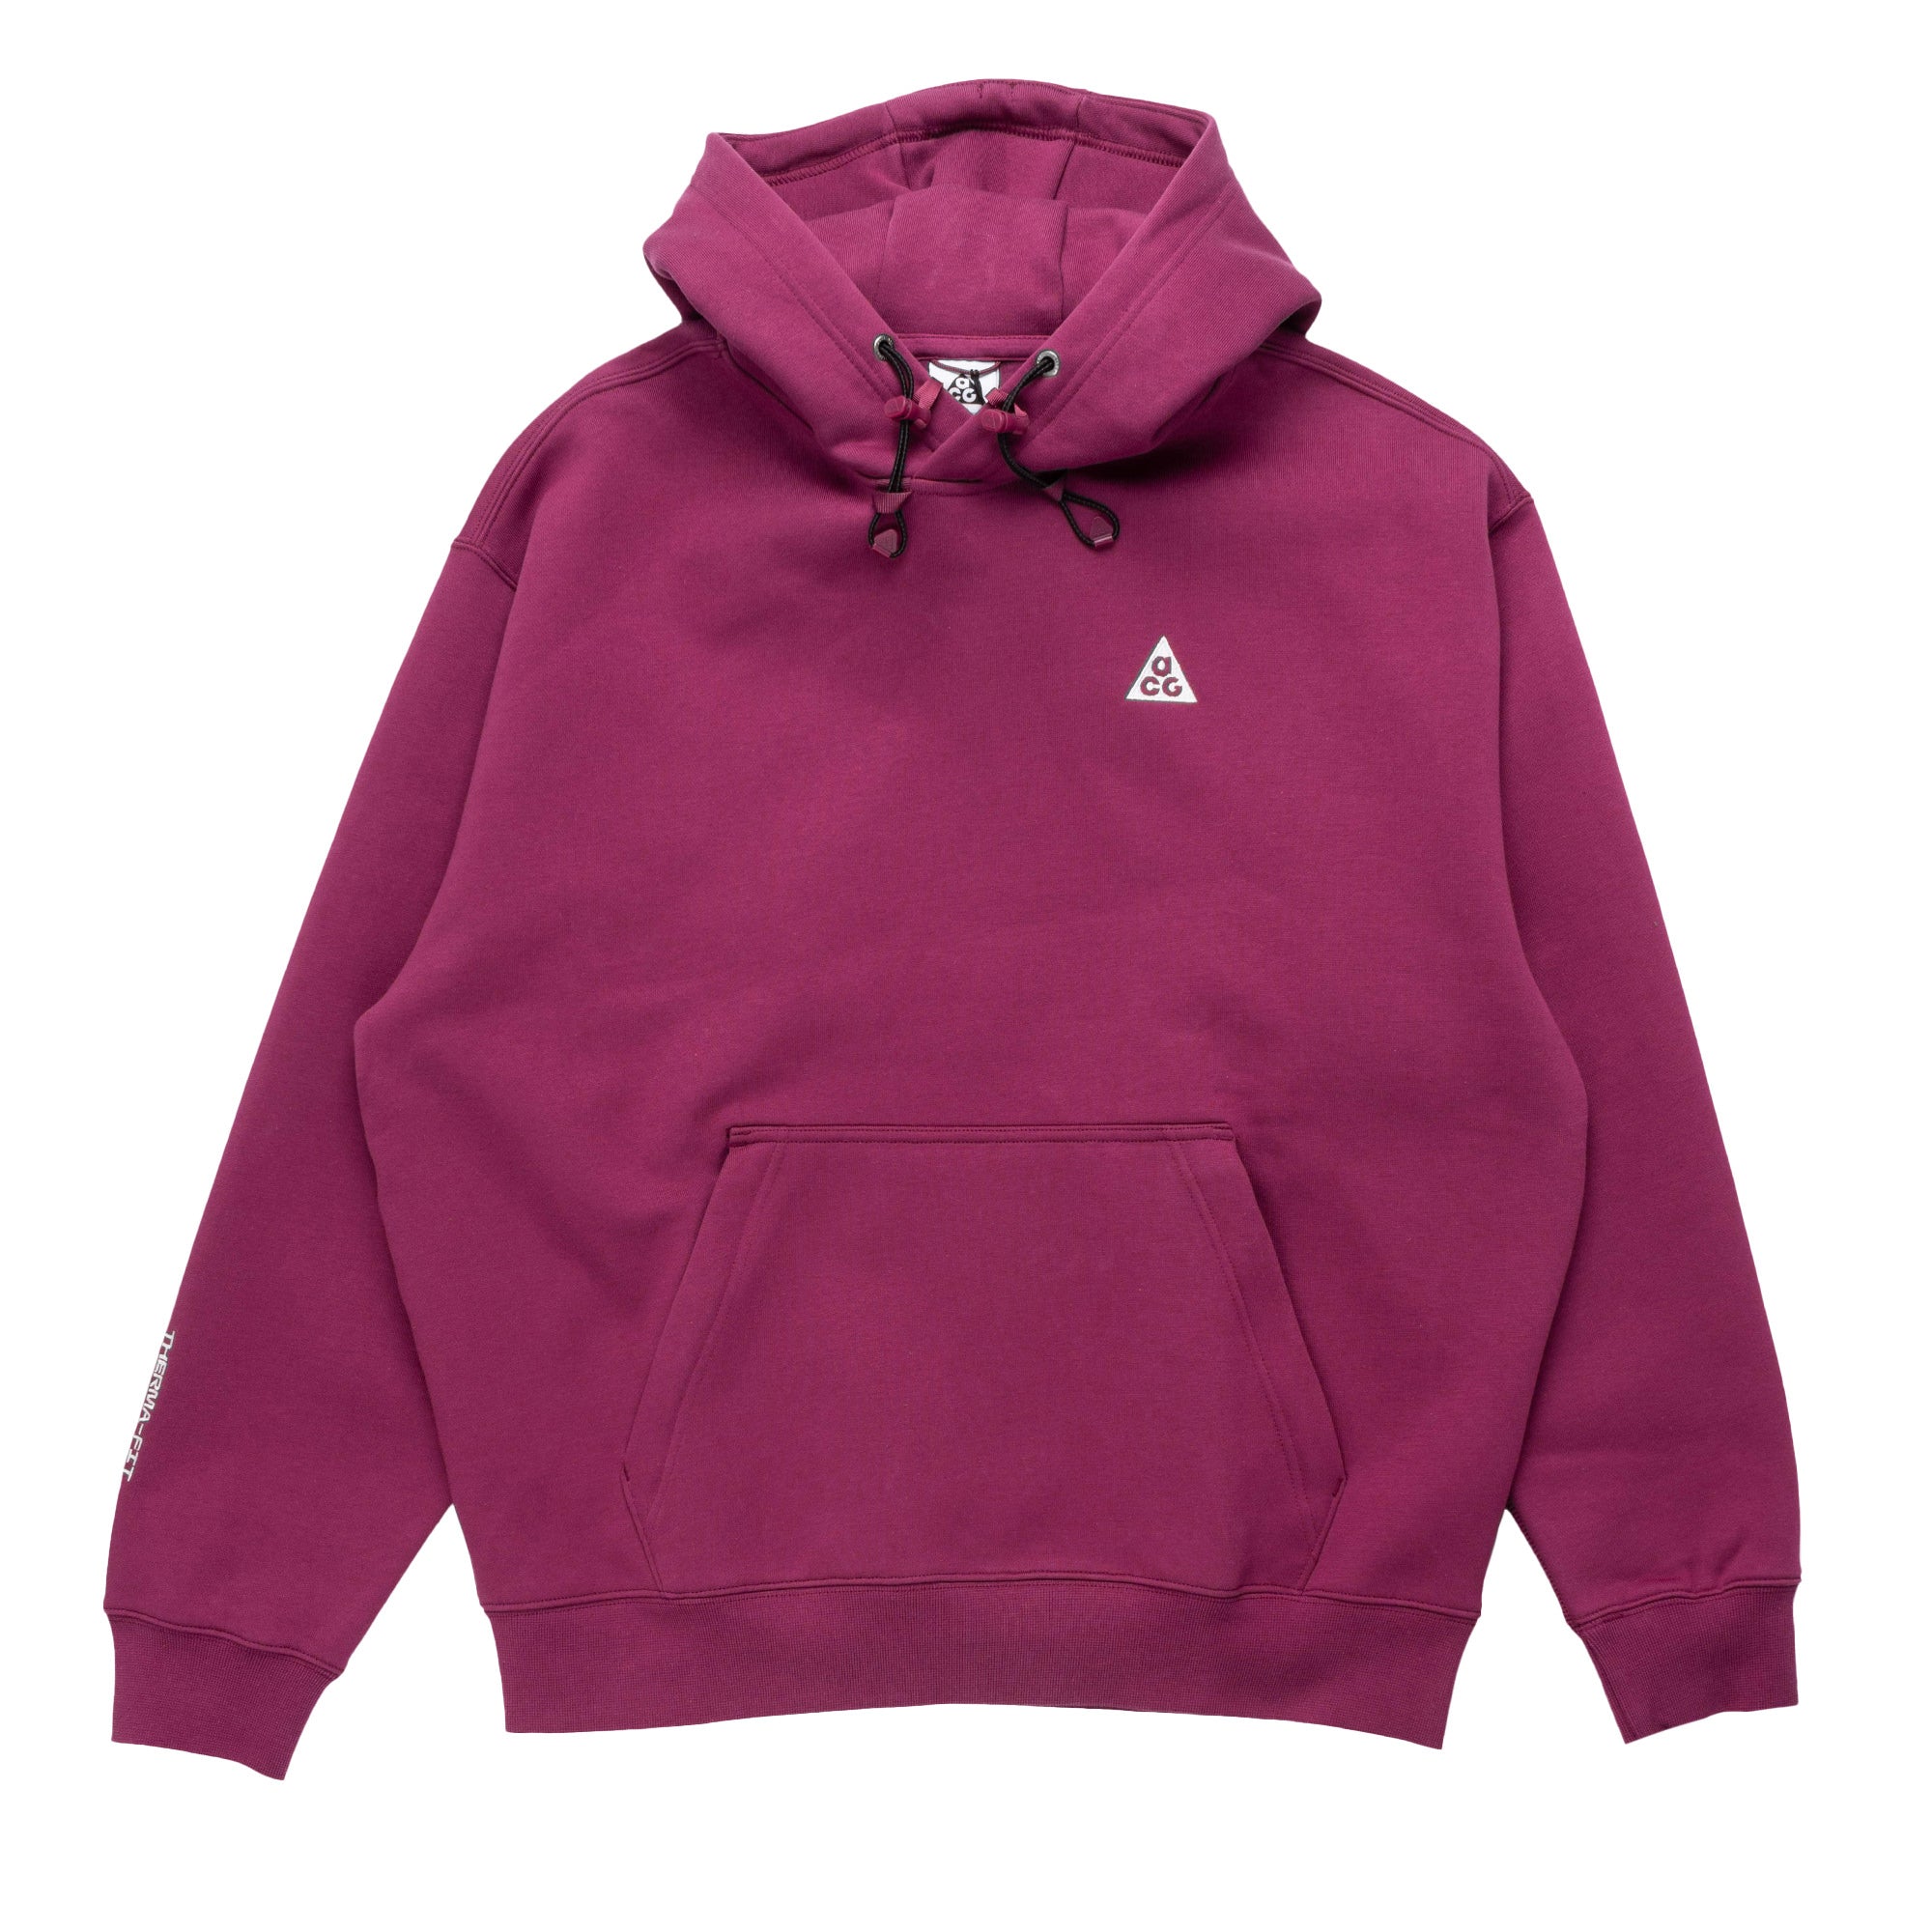 ACG Therma Fit Hoody DZ3392-653 Rosewood